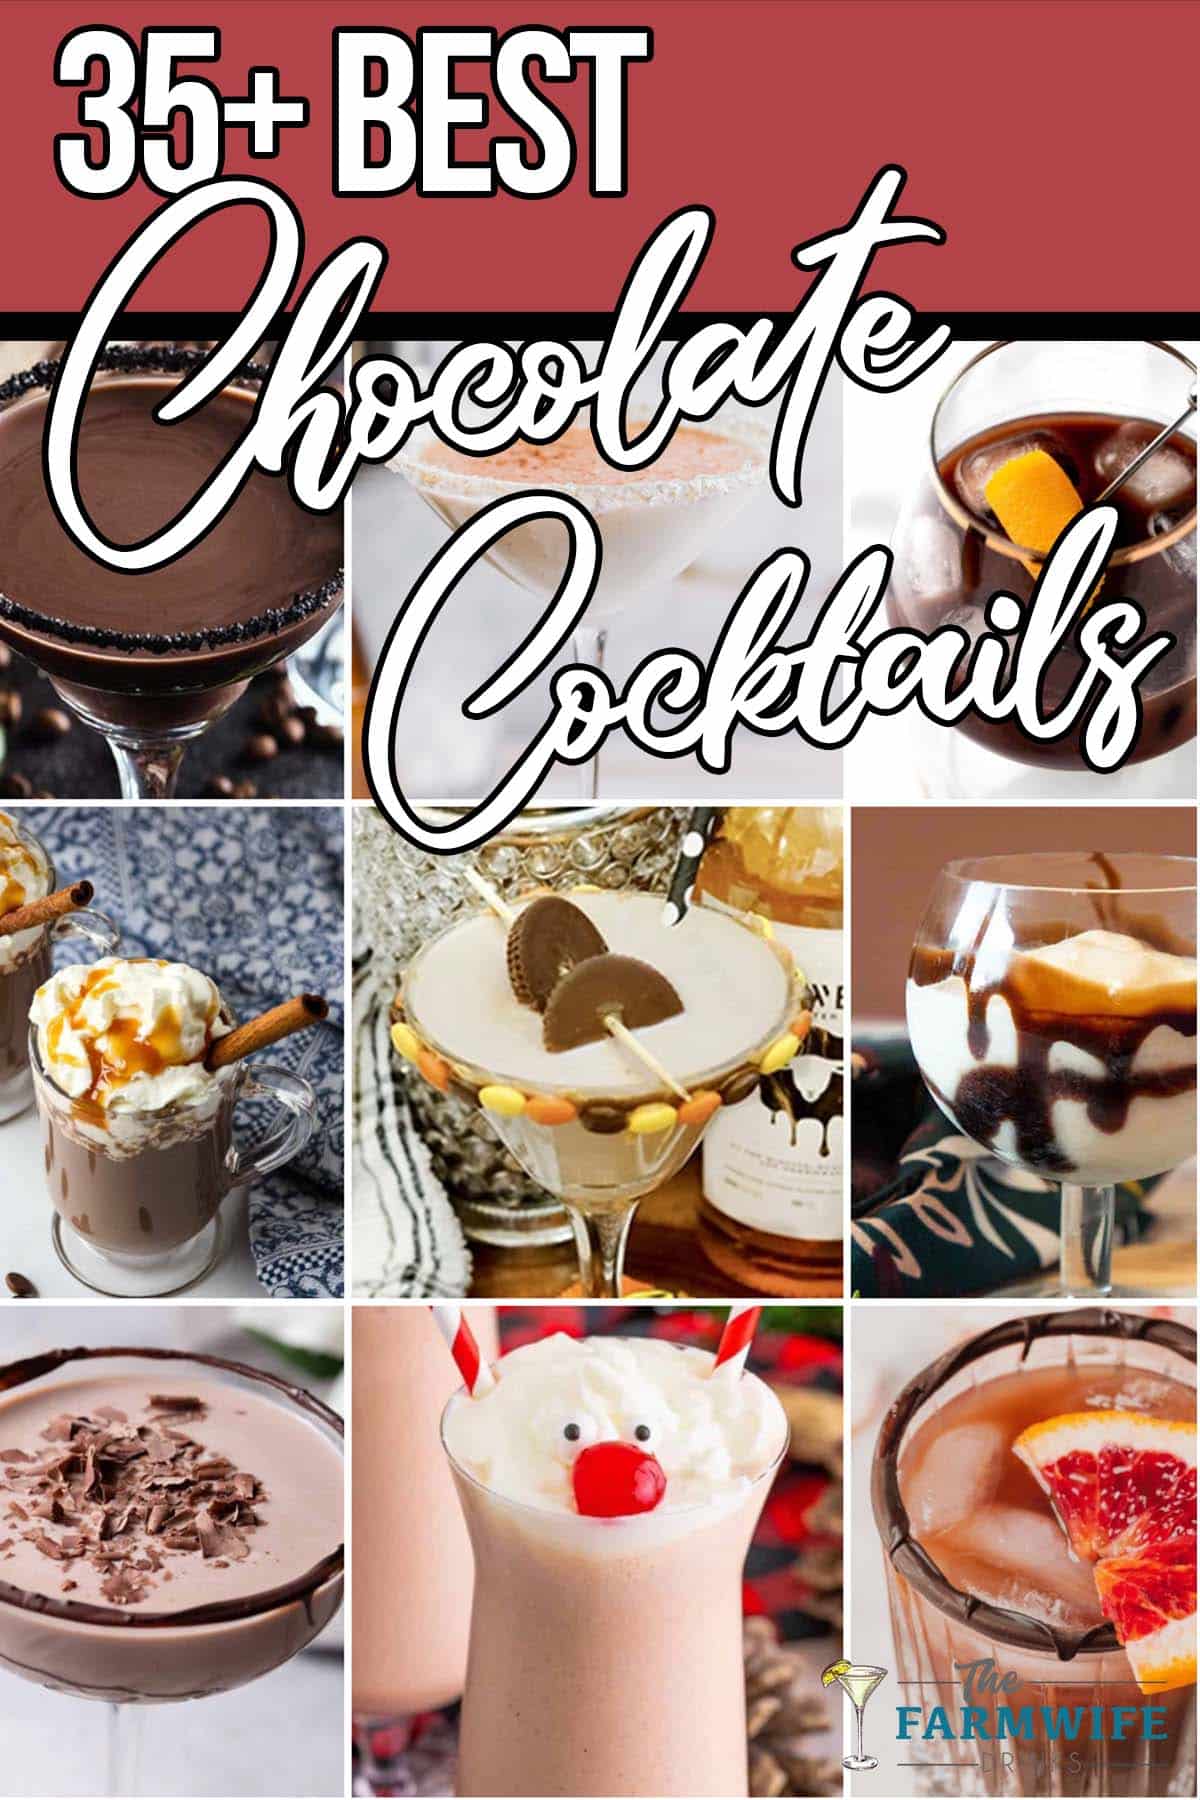 photo collage of chocolate drink ideas with text which reads 35+ best chocolate cocktails